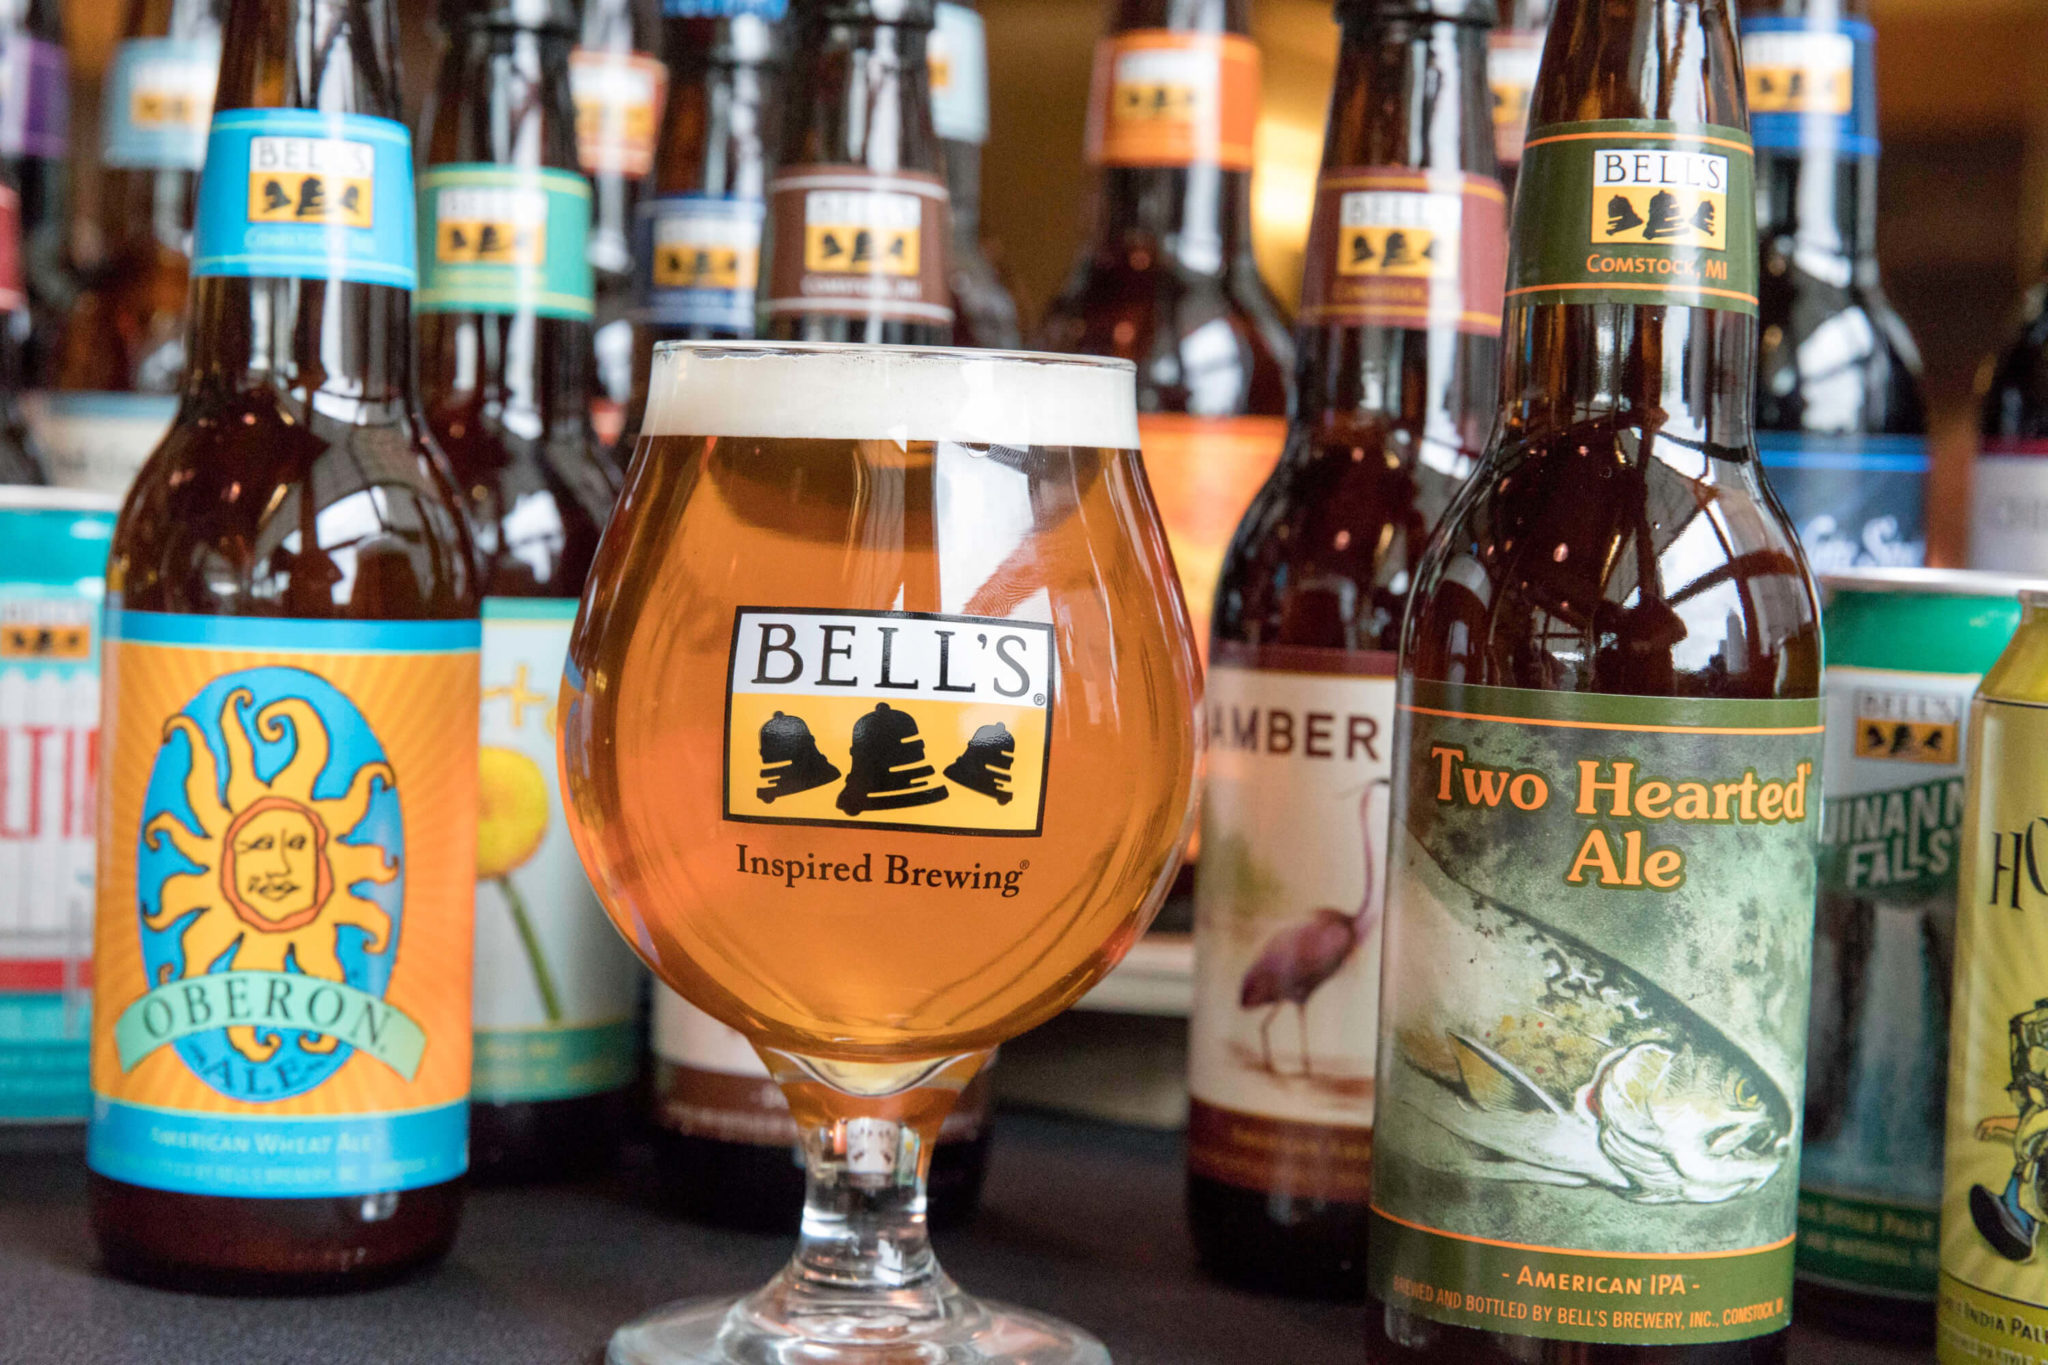 Bell’s Beer Announces Distribution to New Jersey This Summer! SJBS